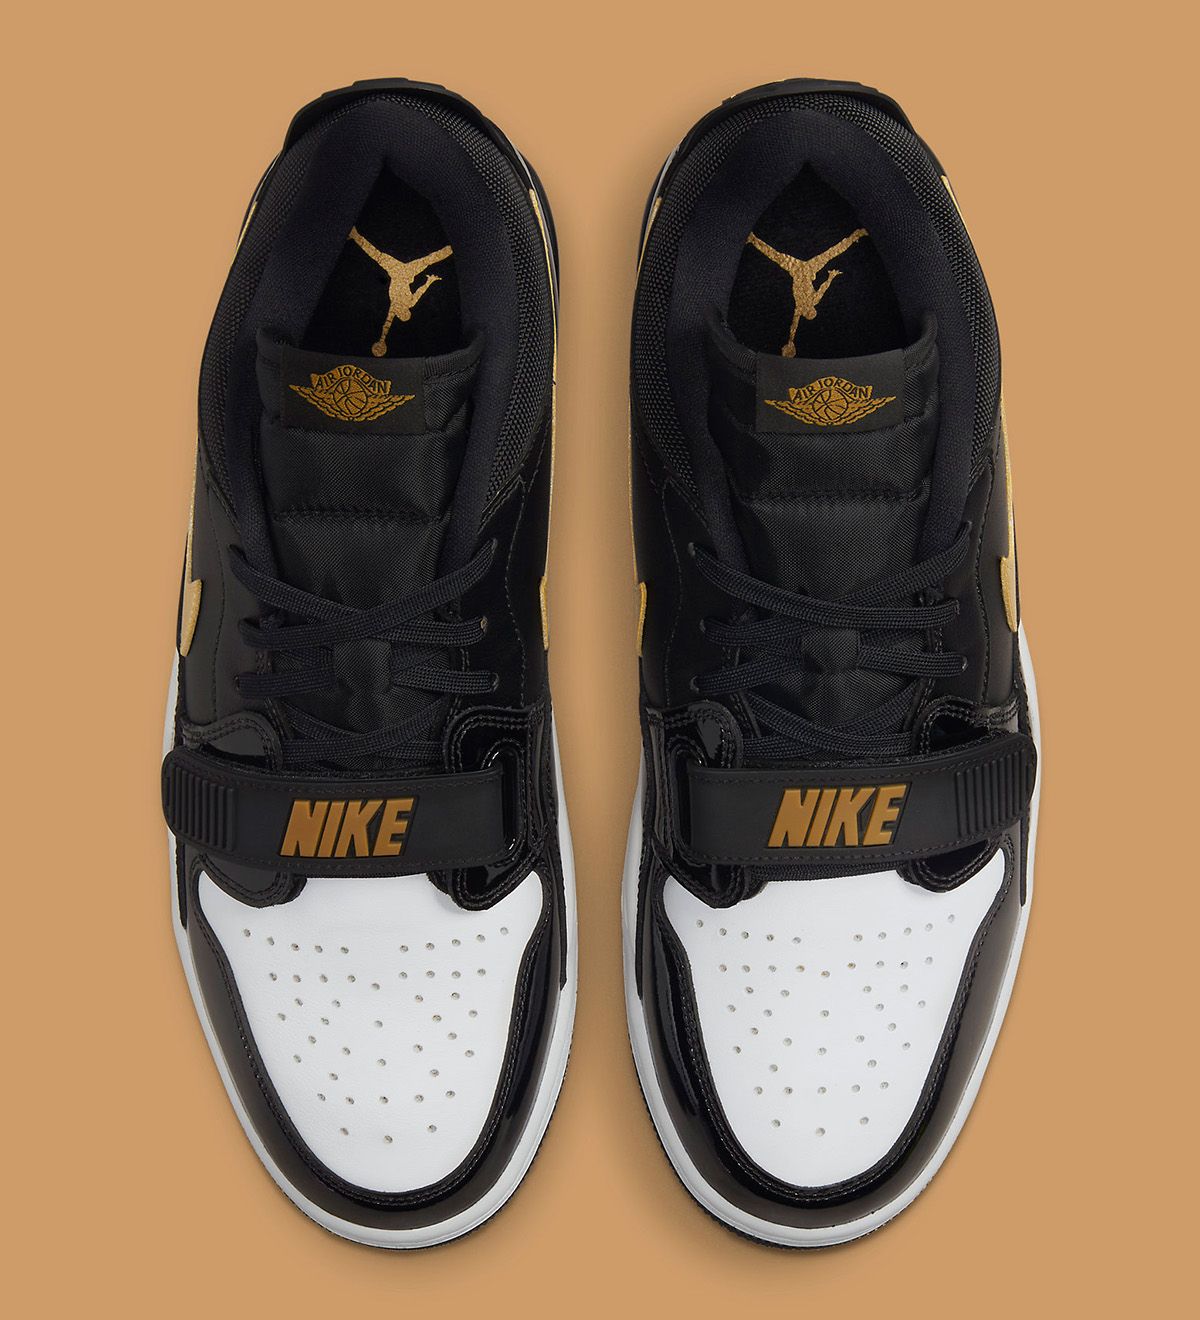 The Jordan Legacy 312 Low in Black and Gold Just Restocked